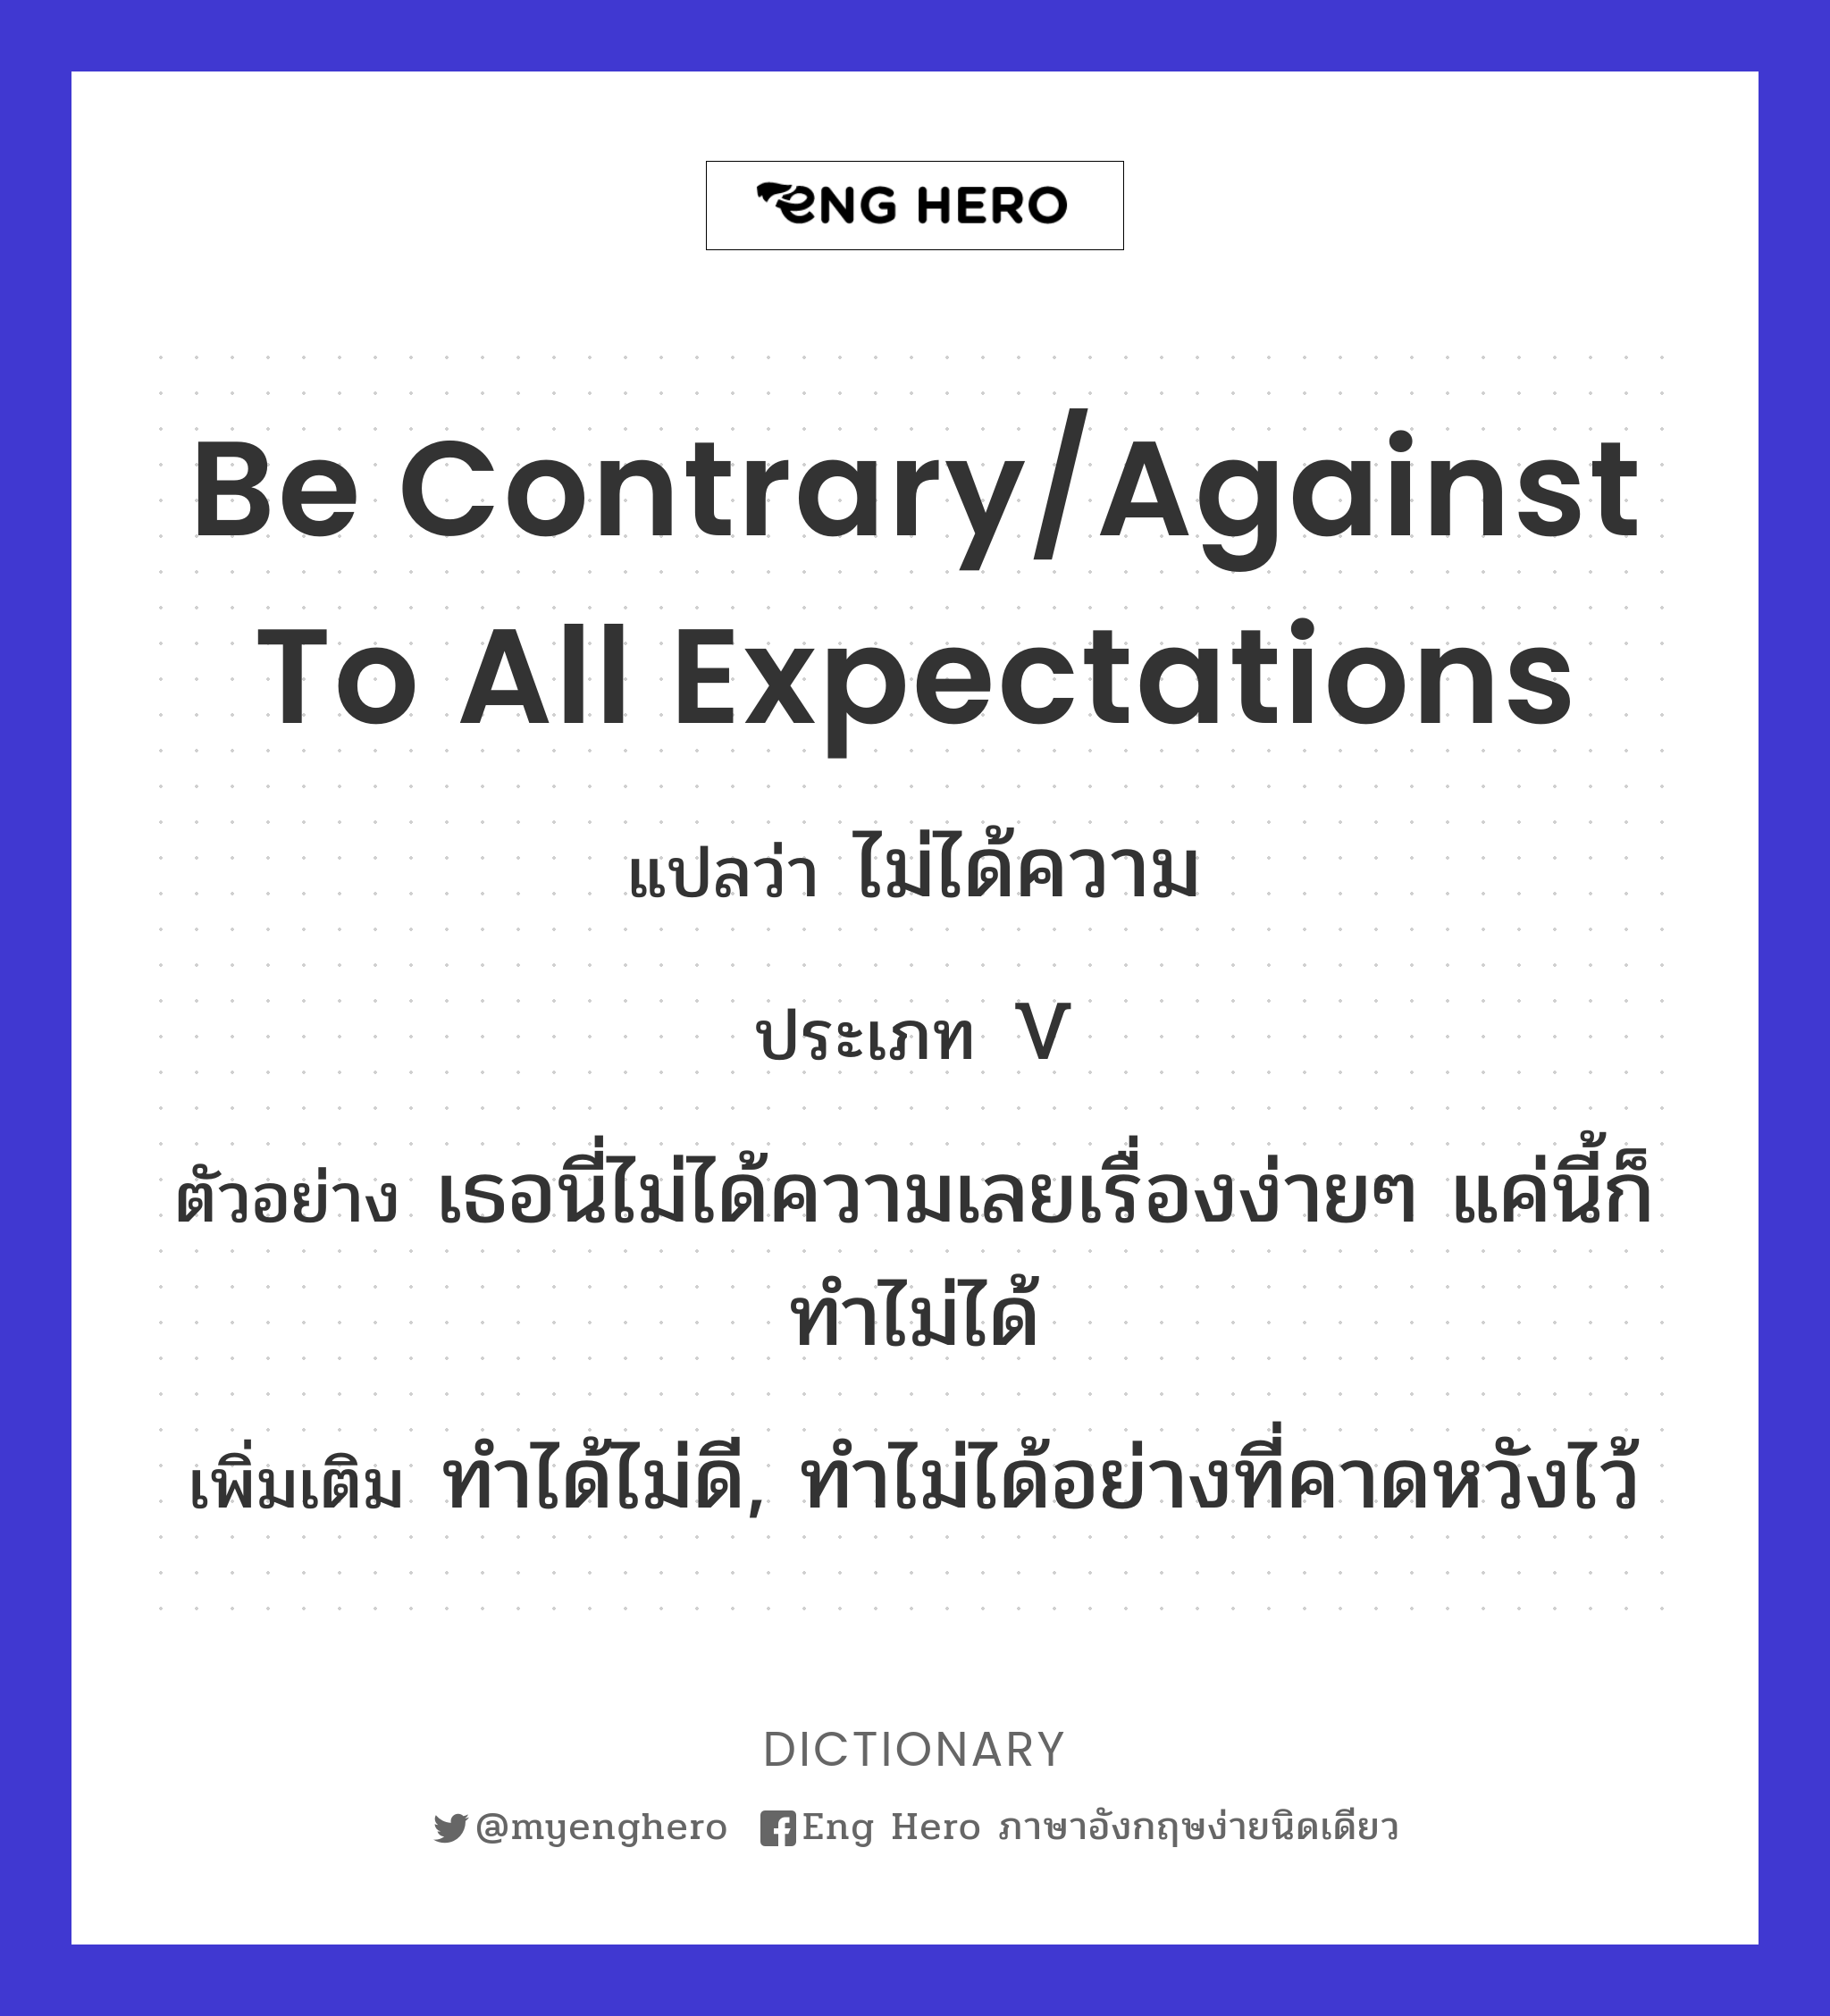 be contrary/against to all expectations